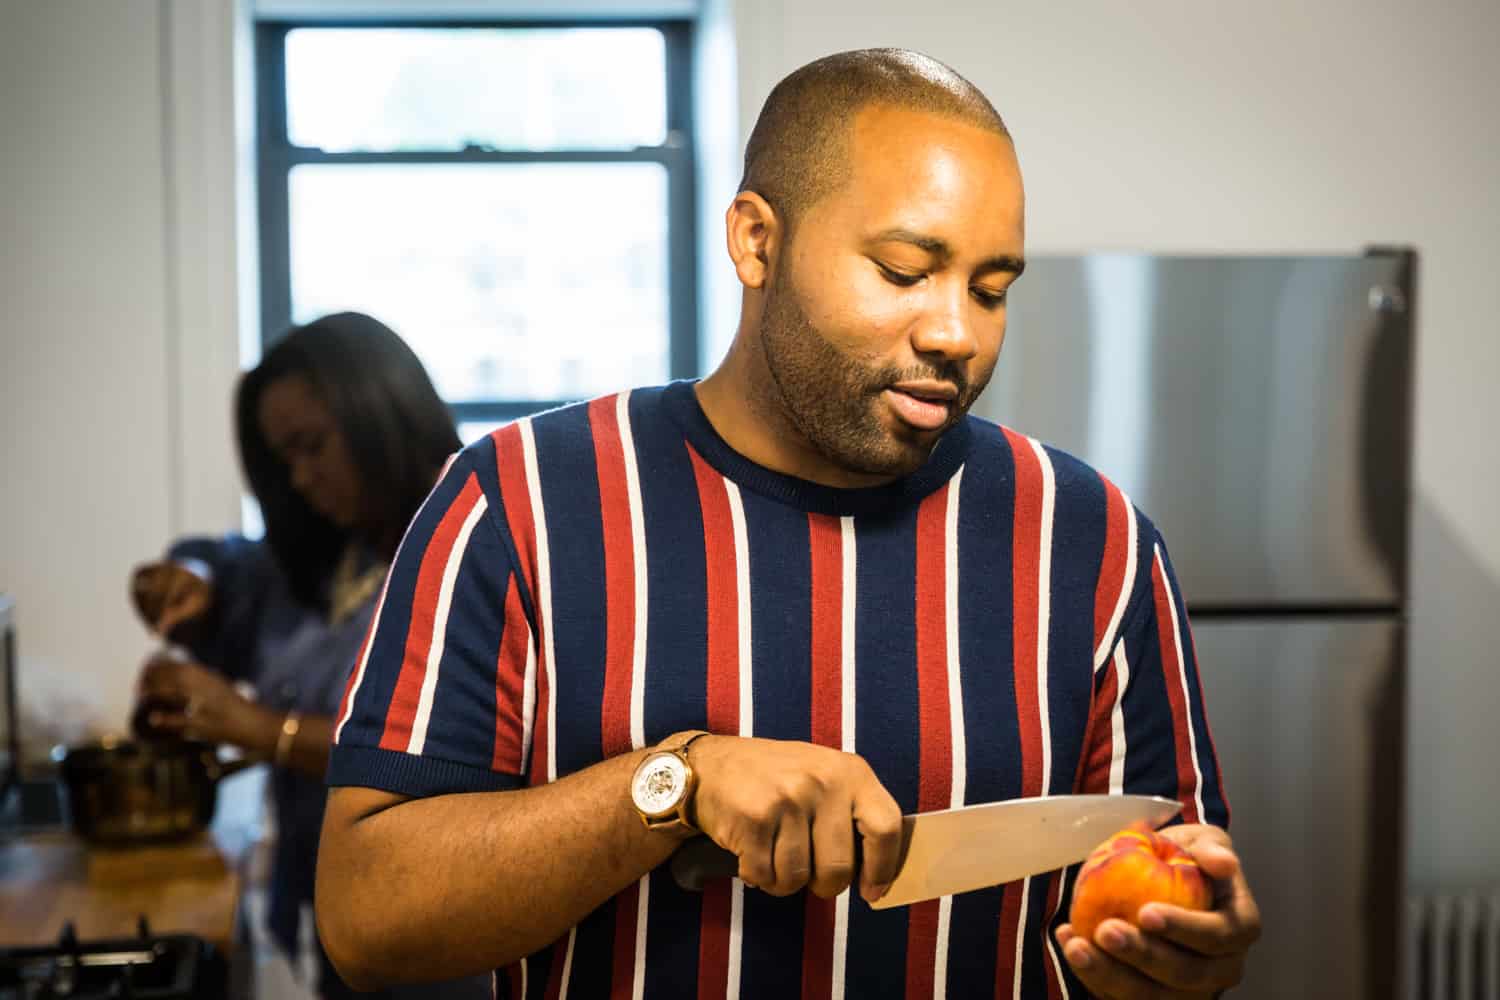 African American man cutting peach for an article on creative engagement photo shoot ideas